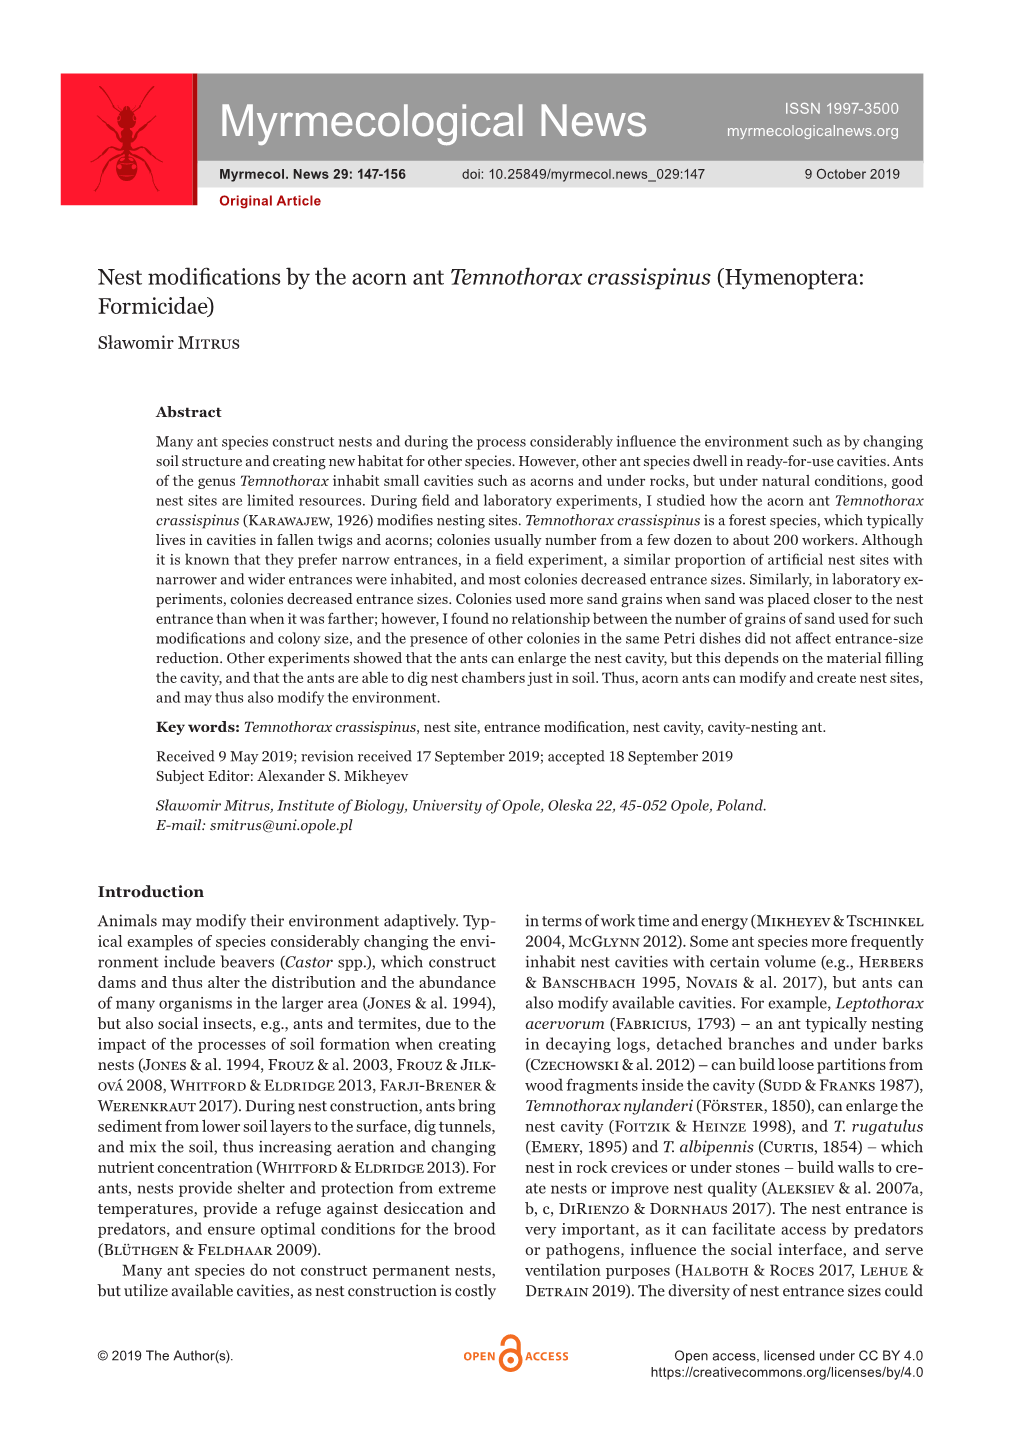 Nest Modifications by the Acorn Ant Temnothorax Crassispinus (Hymeno­Ptera: Formicidae) Sławomir Mitrus